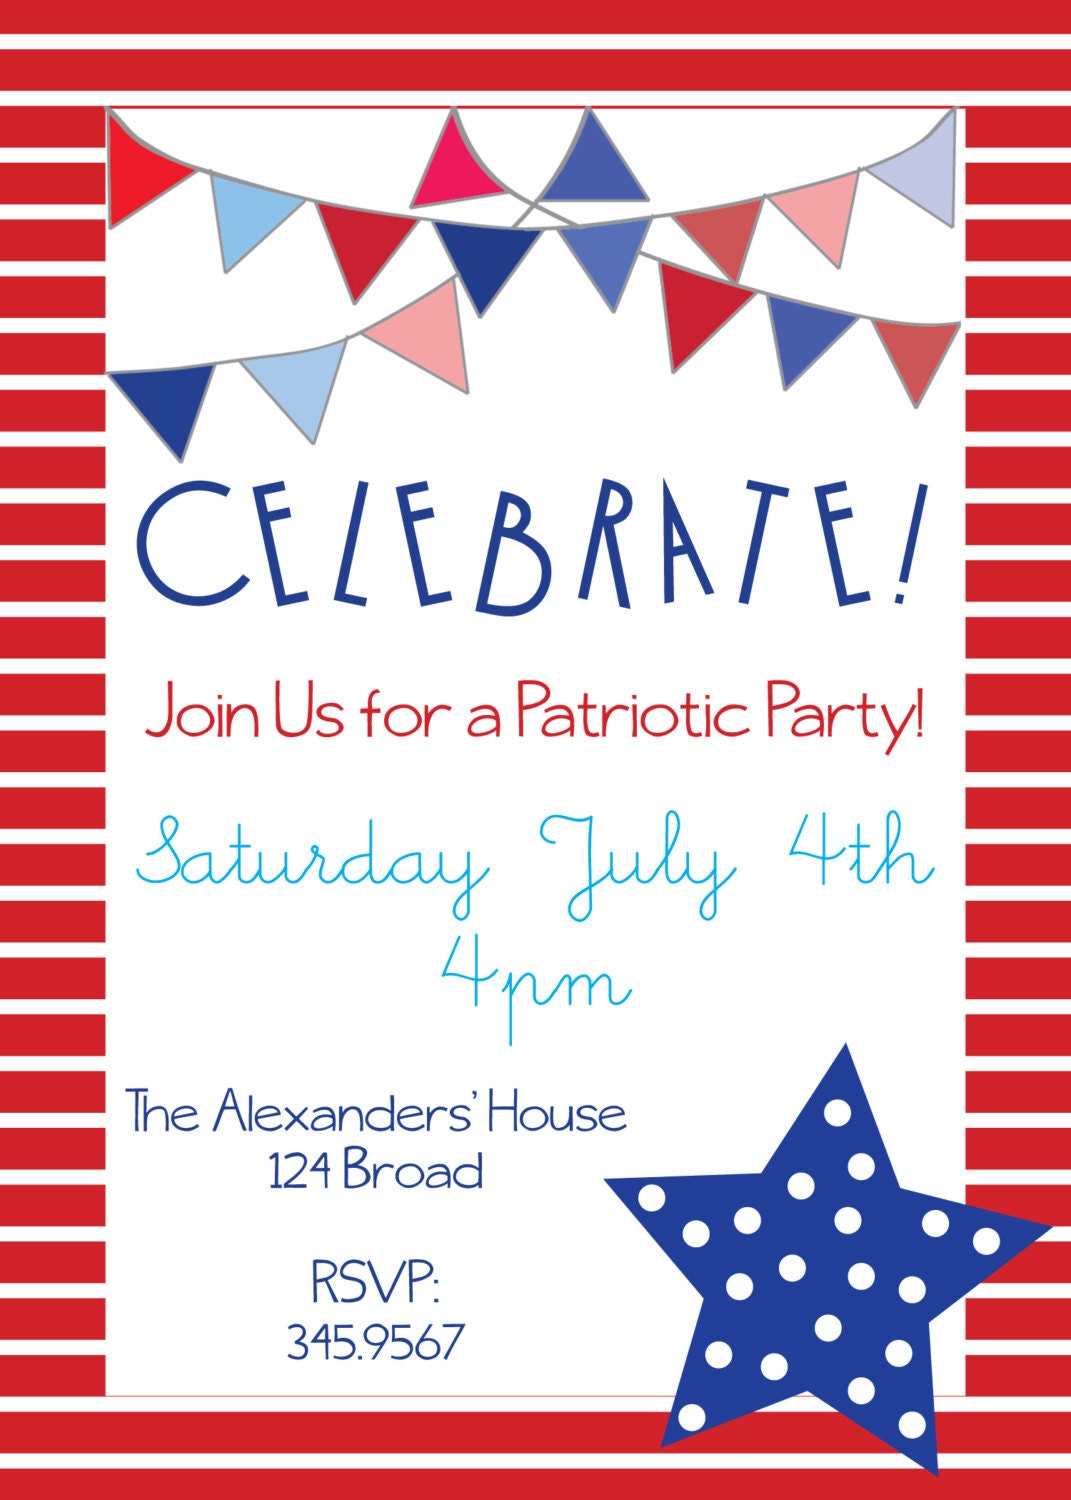 patriotic-party-invitations-for-memorial-day-4th-of-july-or